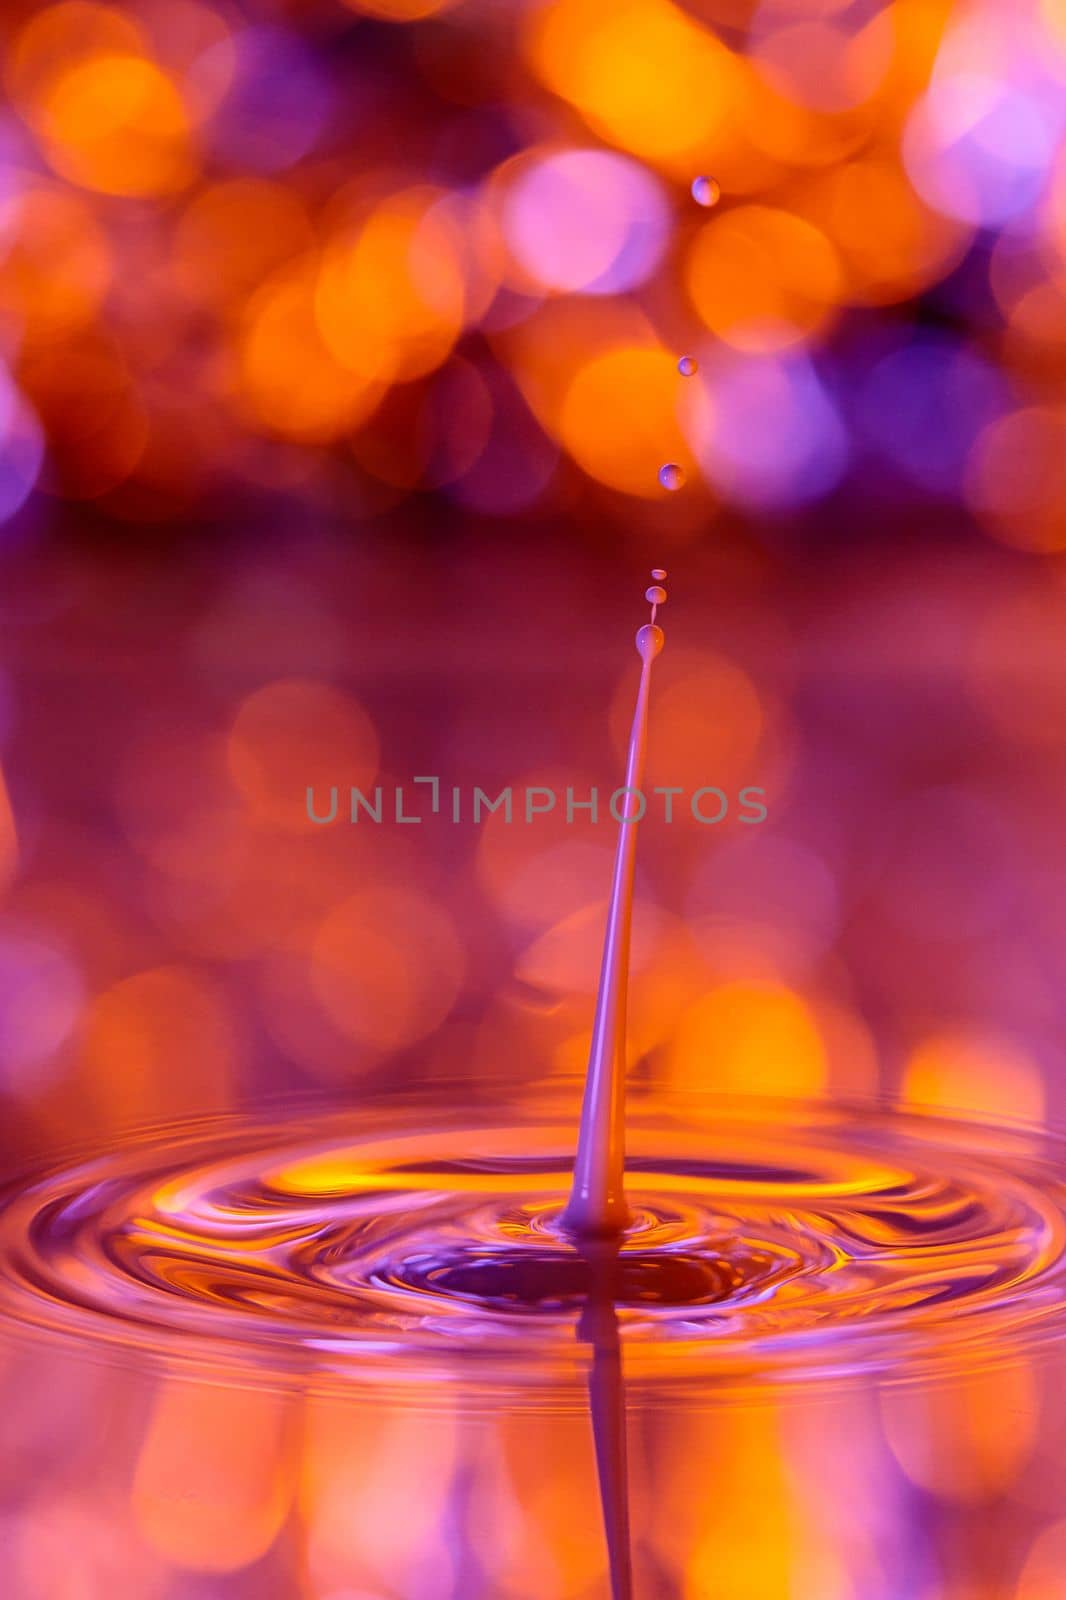 The drop falls into a dense liquid with an orange background. Abstract colorful background. by Yurich32